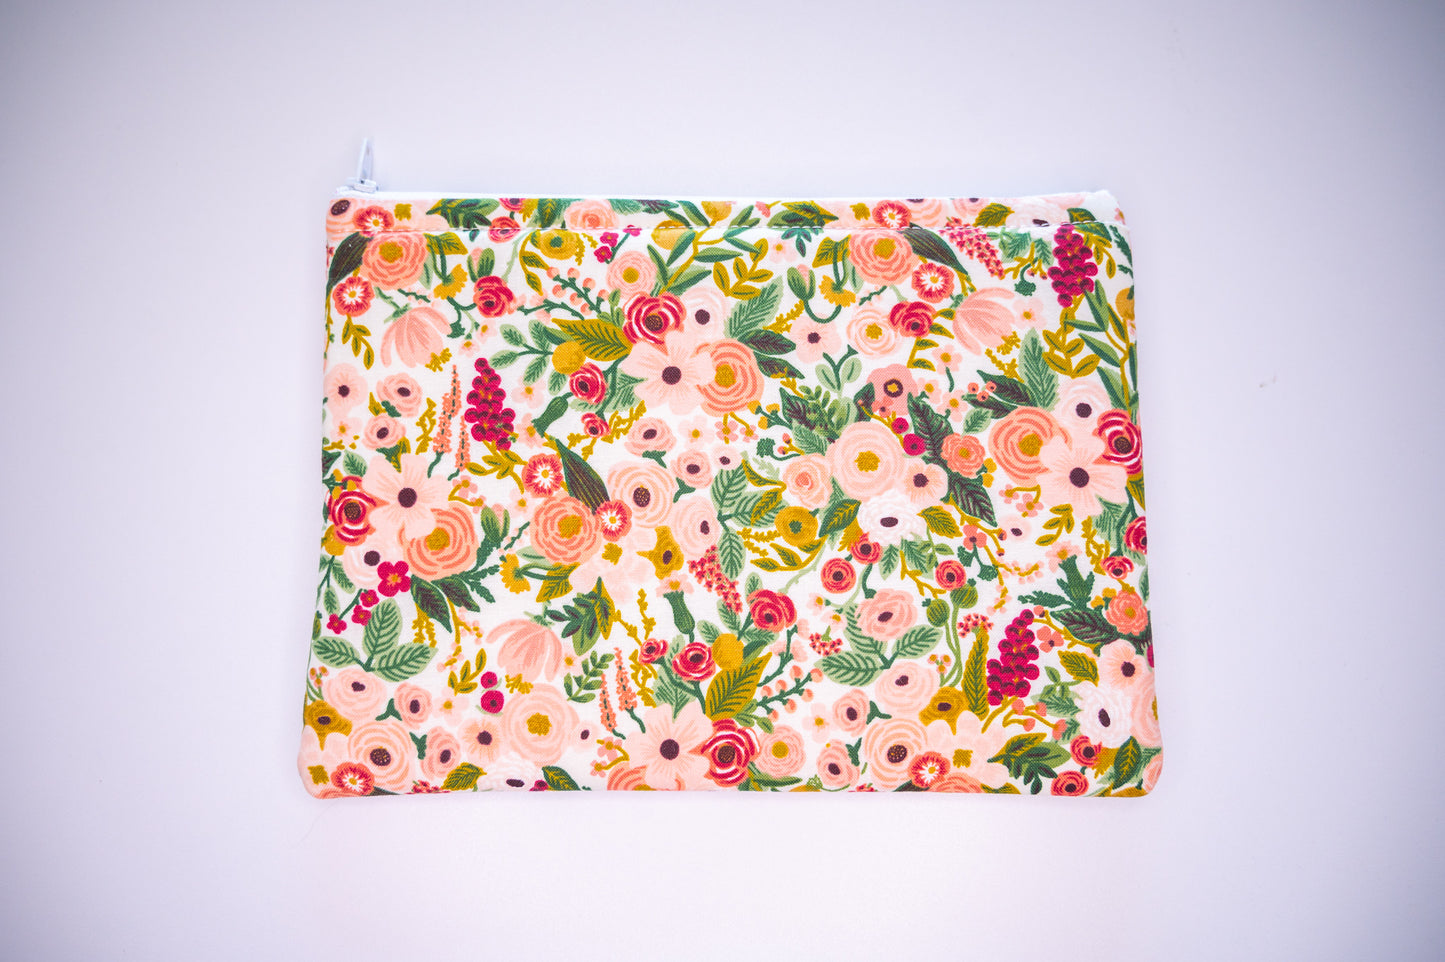 Rose Garden Party Kindle Sleeve